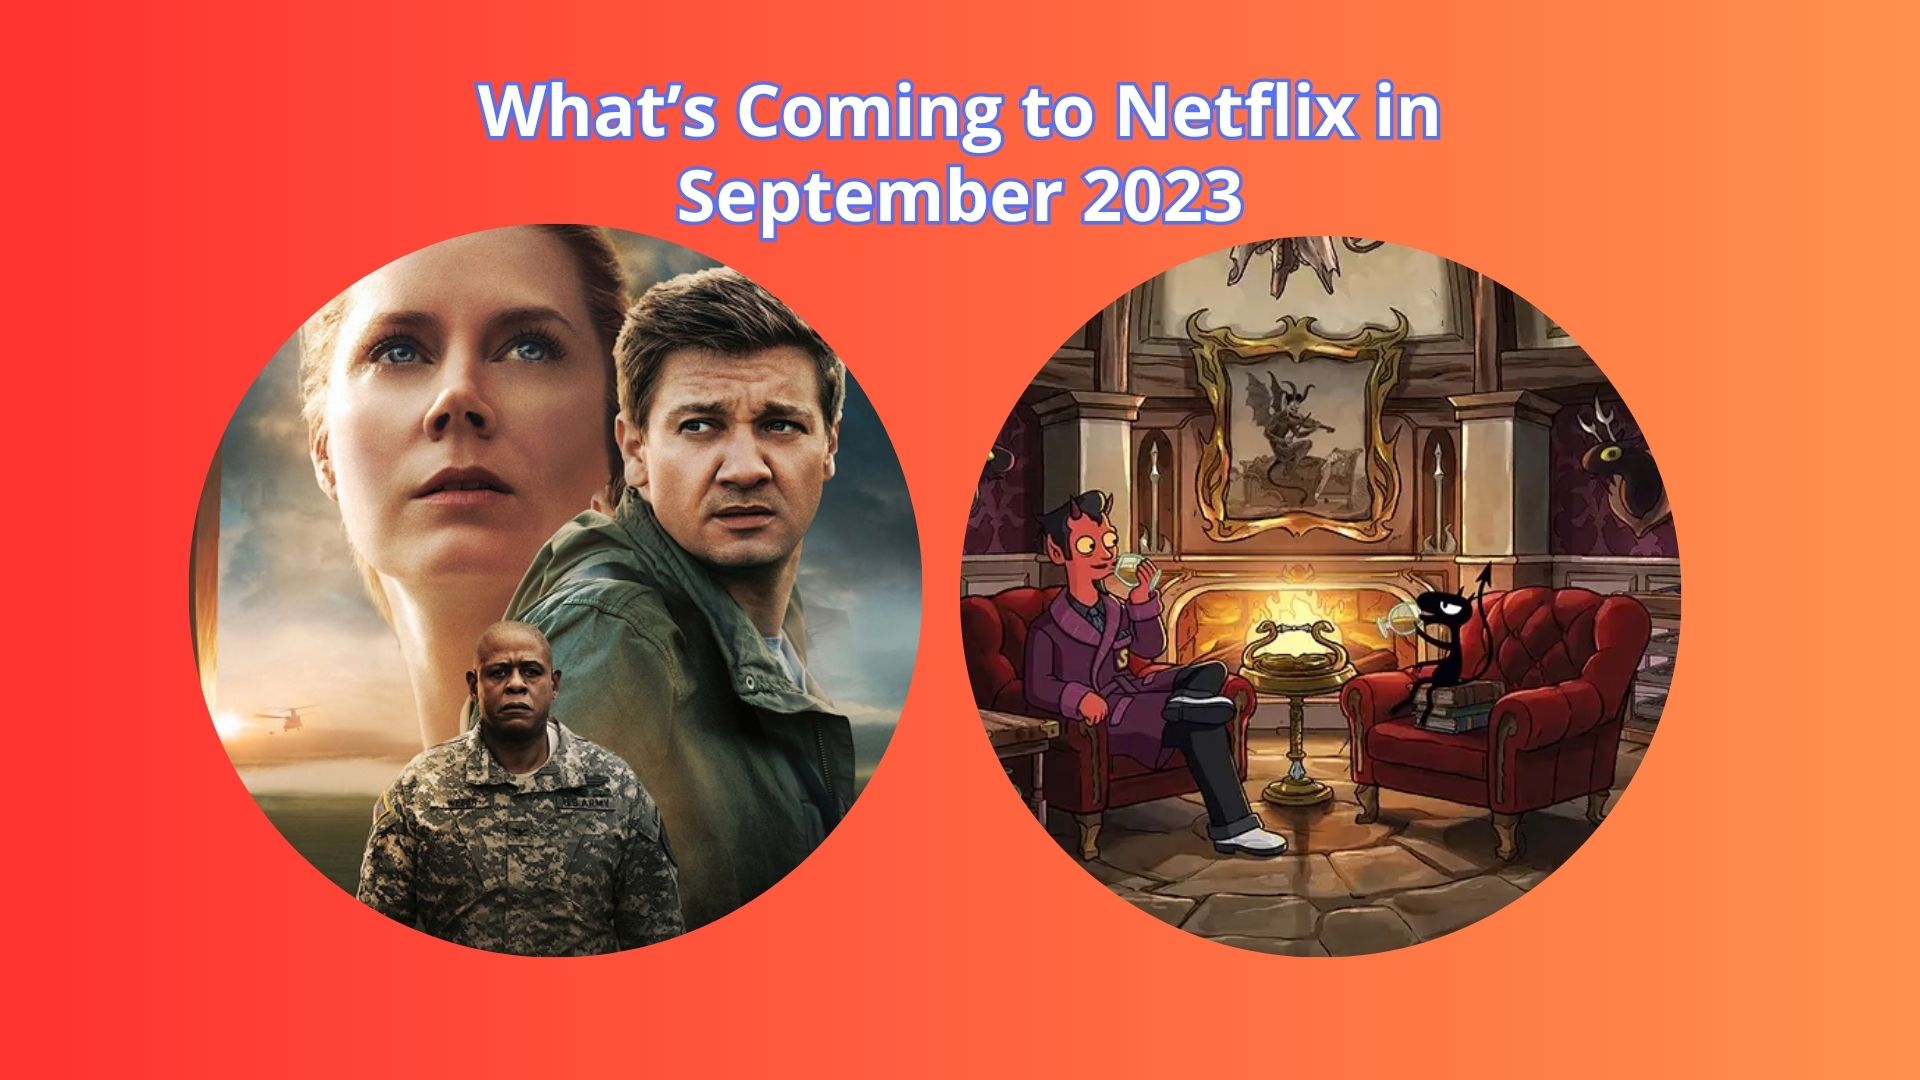 What’s Coming to Netflix in September 2023